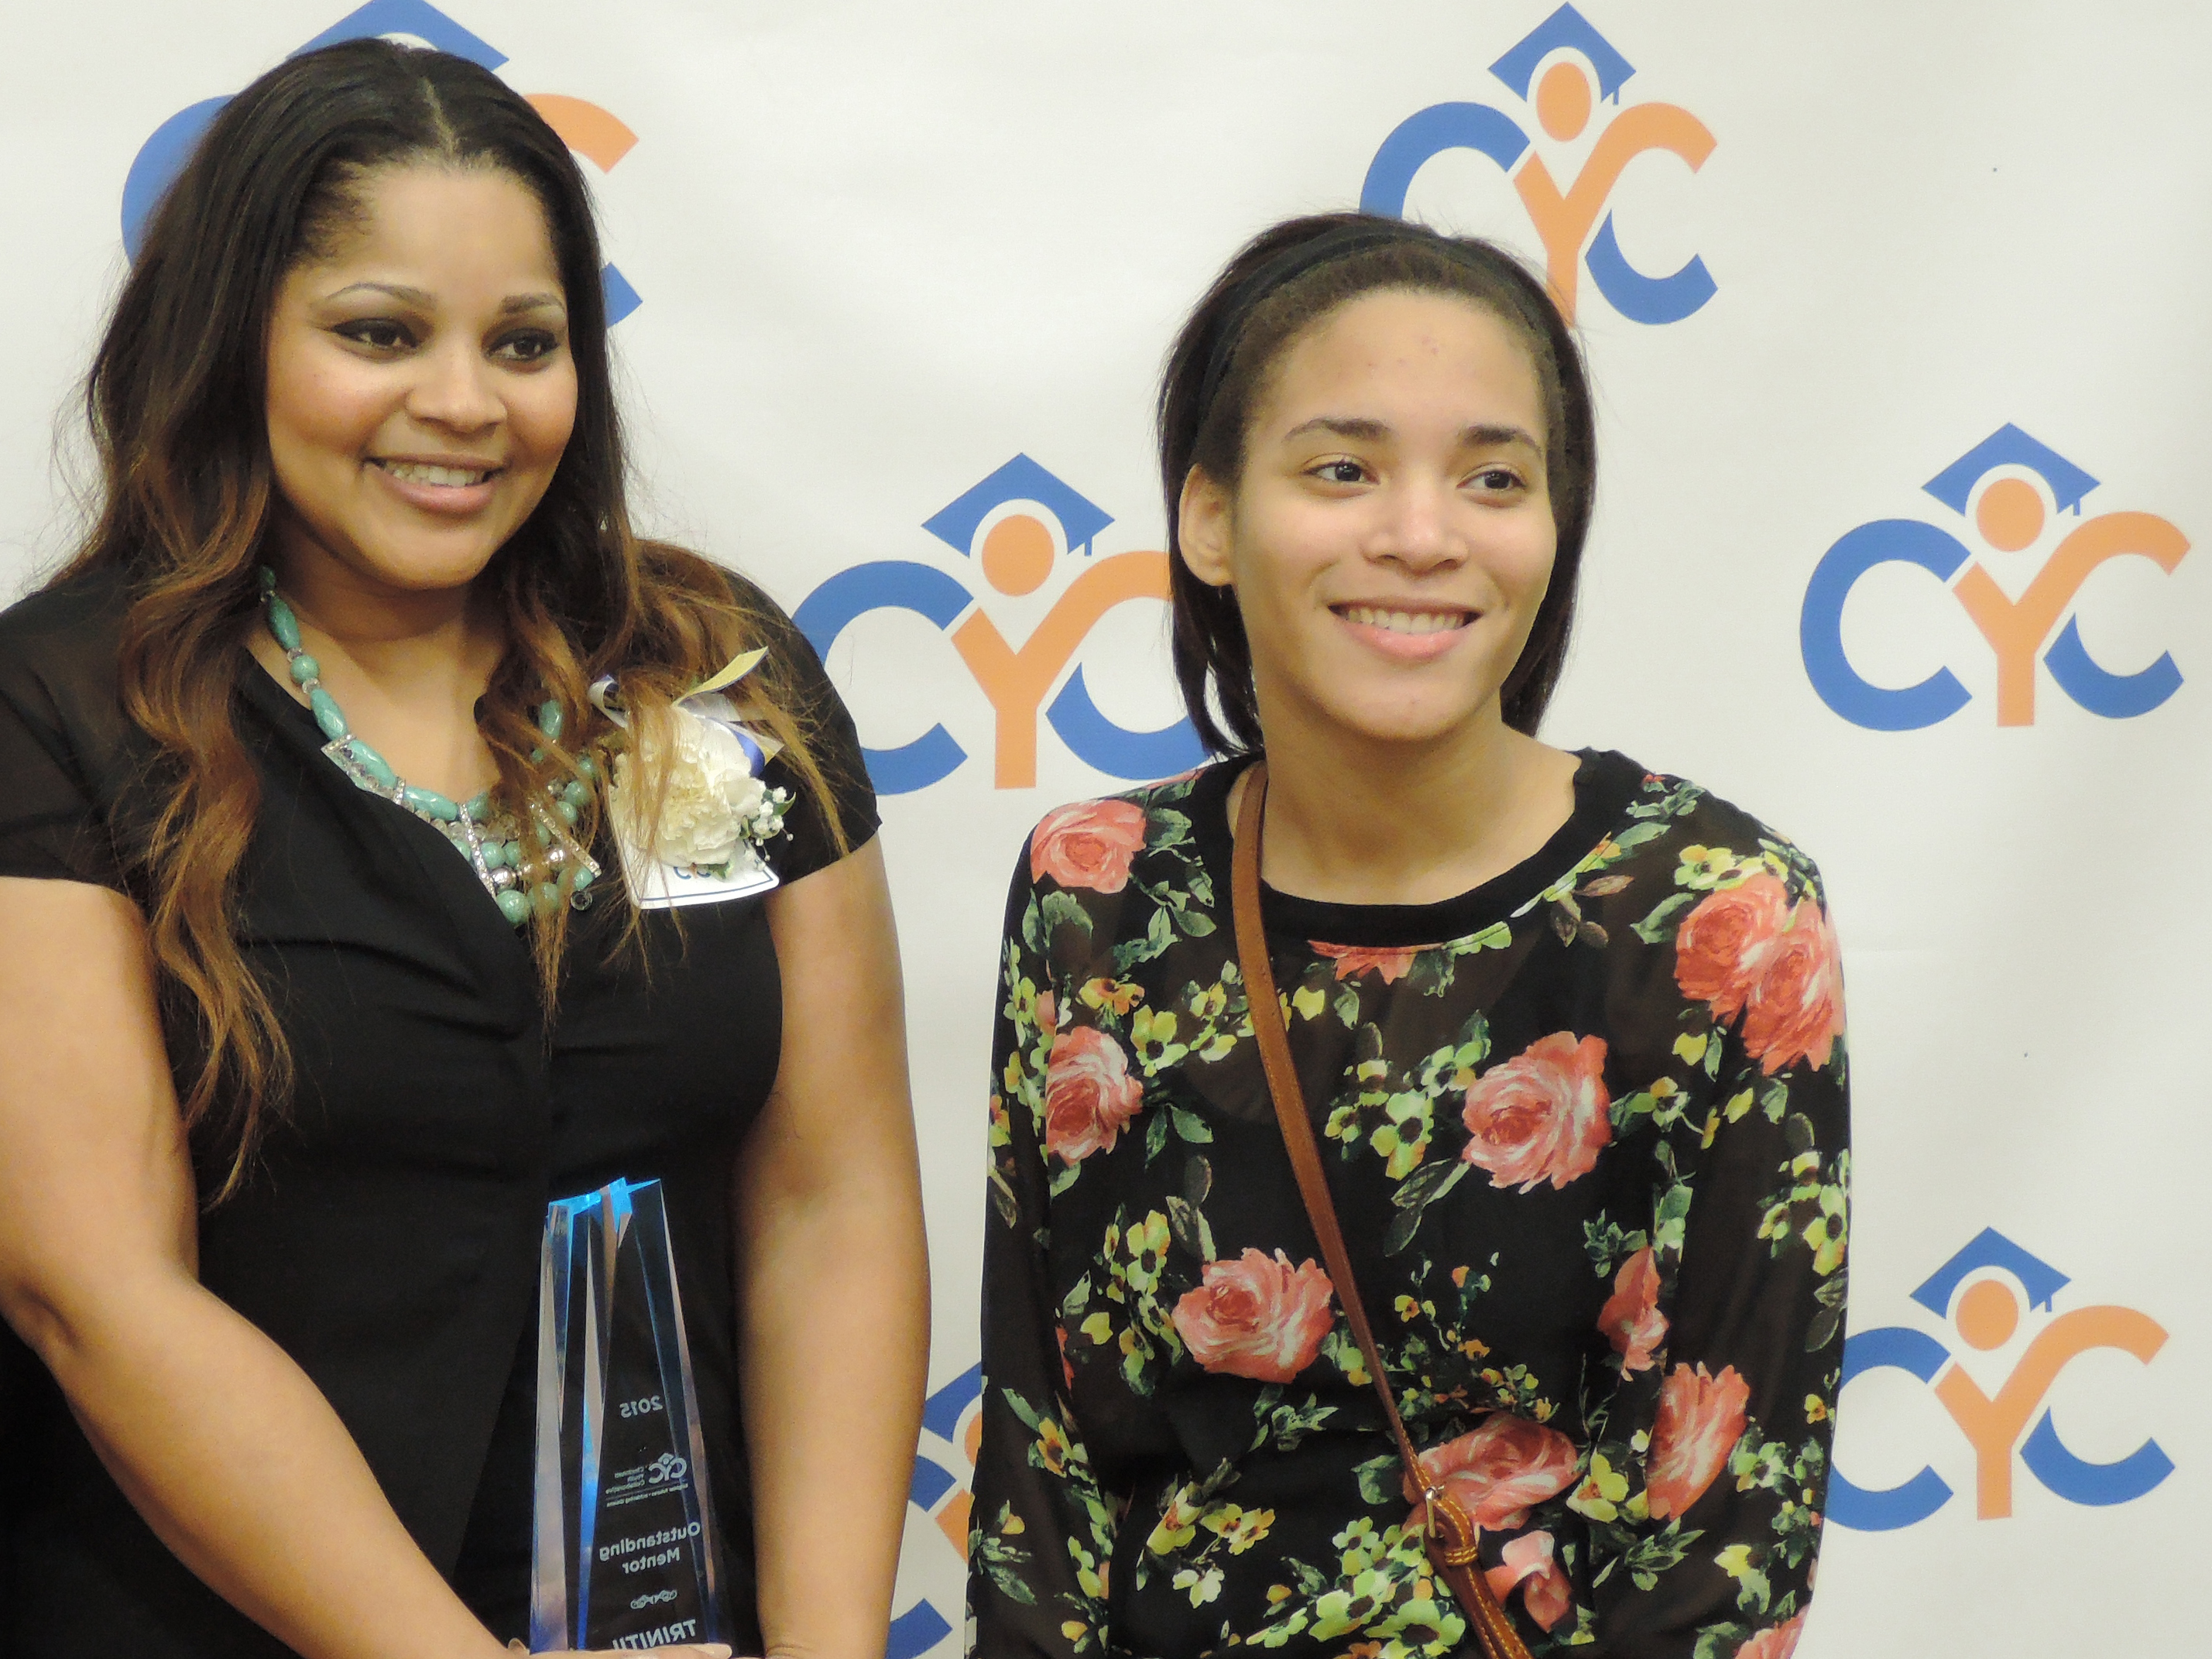 Trinitii Brewer (left) and mentee Alicia Porter at CYC's National Thank Your Mentor Day celebration